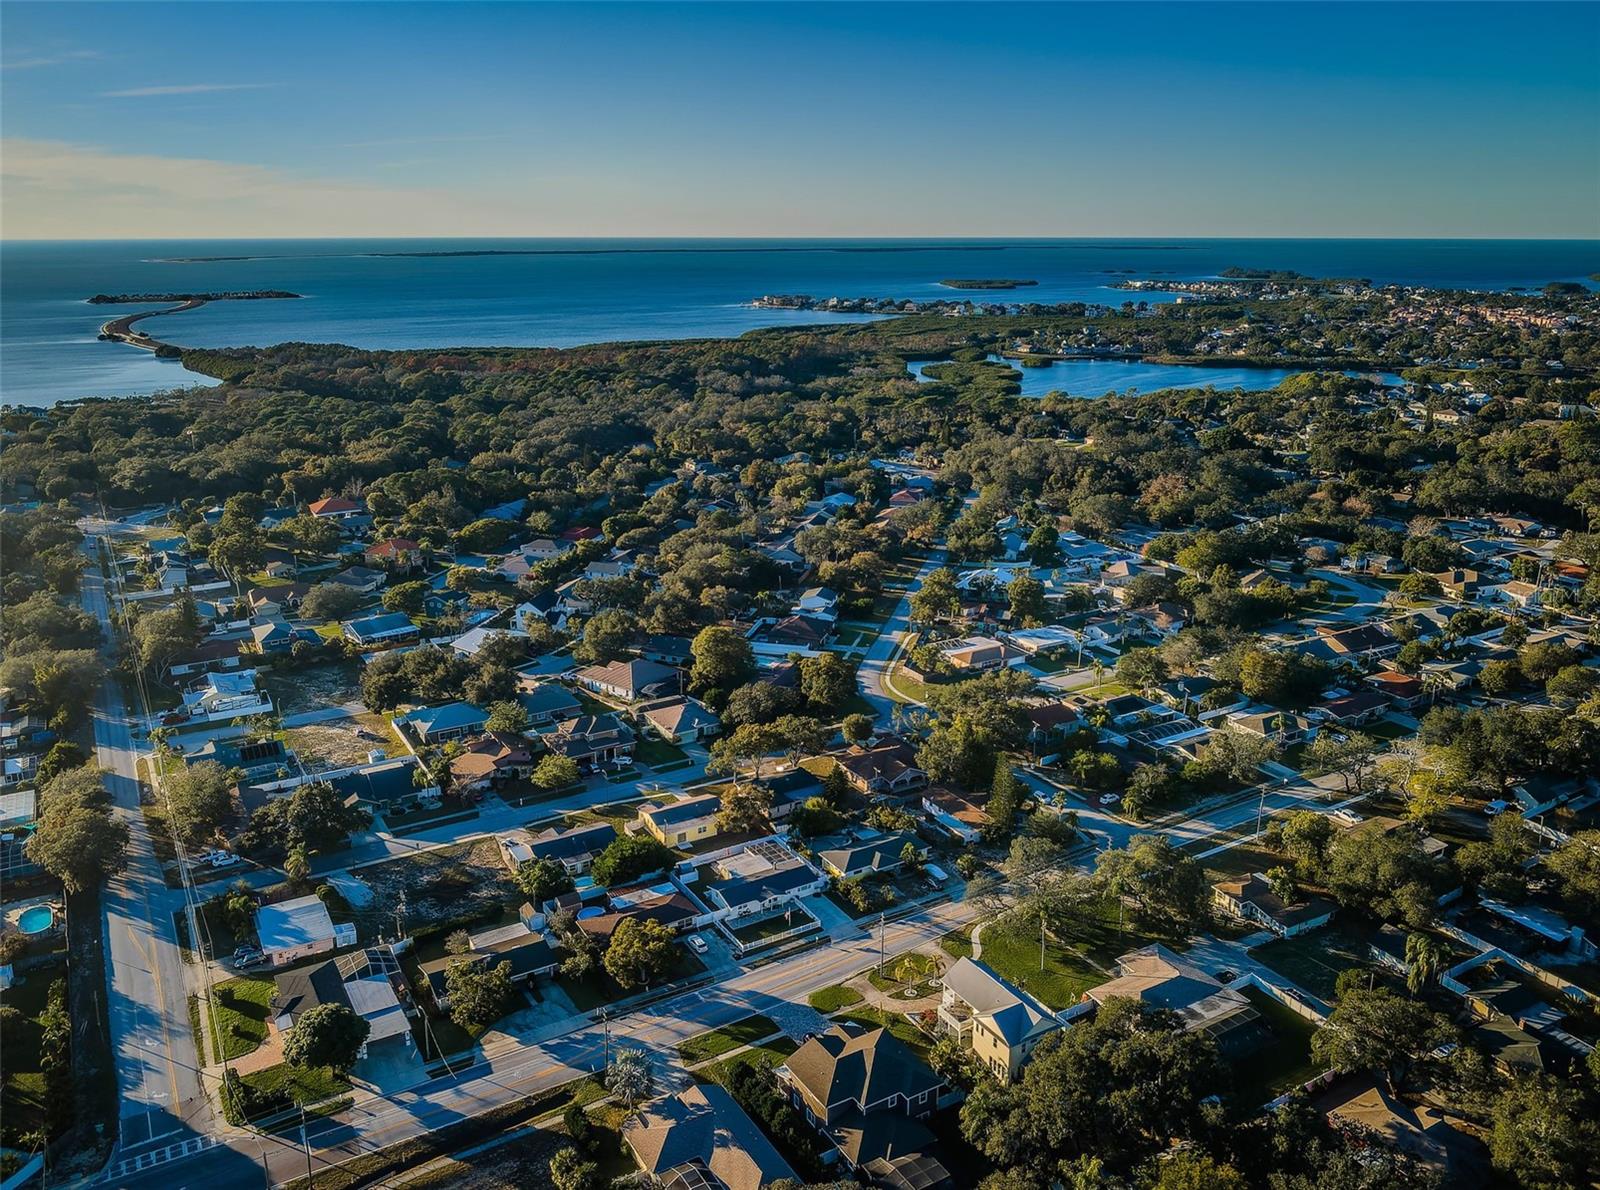 AERIAL FACING NORTH WEST / ANCLOTE RIVER